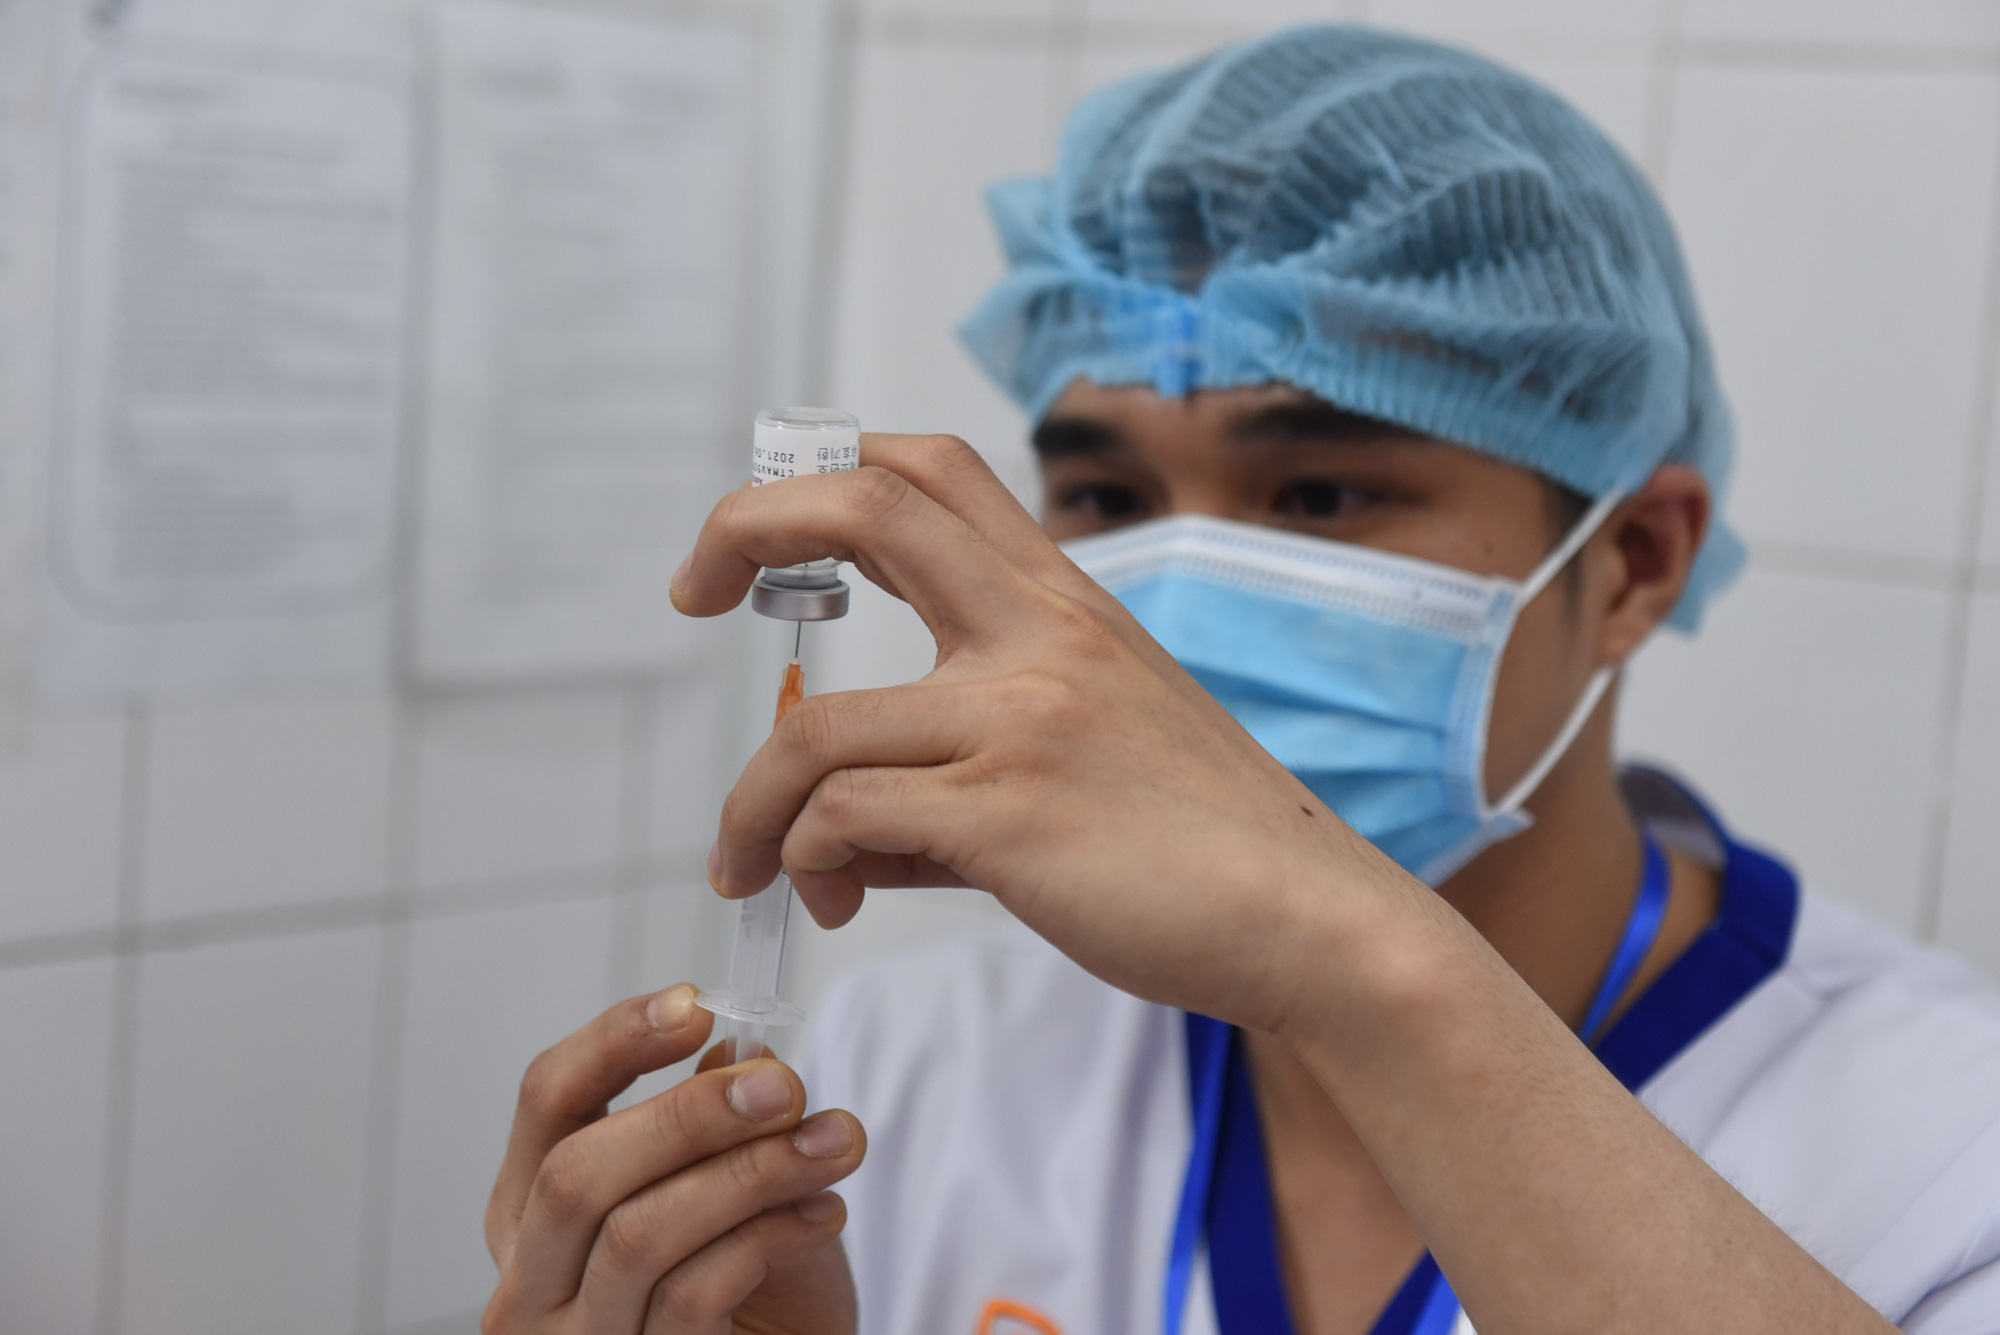 A health worker prepares for COVID-19 vaccination at the Ho Chi Minh City Hospital for Tropical Diseases, March 8, 2021. Photo: Duyen Phan / Tuoi Tre